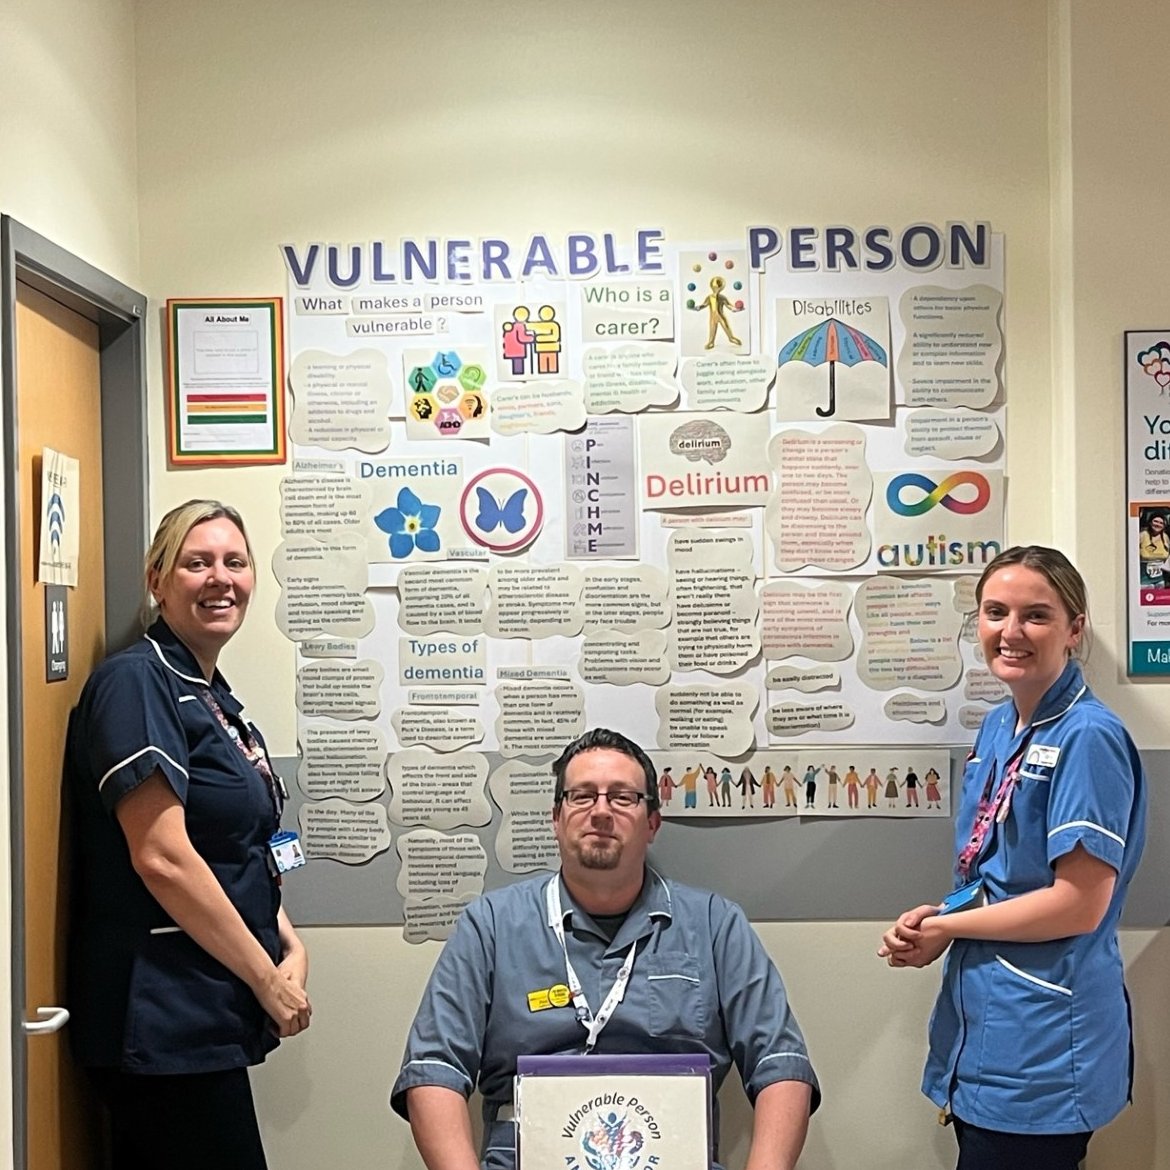 ⭐️⭐️Our wonderful Vulnerable Person board from our ward 207 ambassador's⭐️⭐️ @UHDBTrust @cbaddeley82 @LynseyHeald @hill_karenhill3